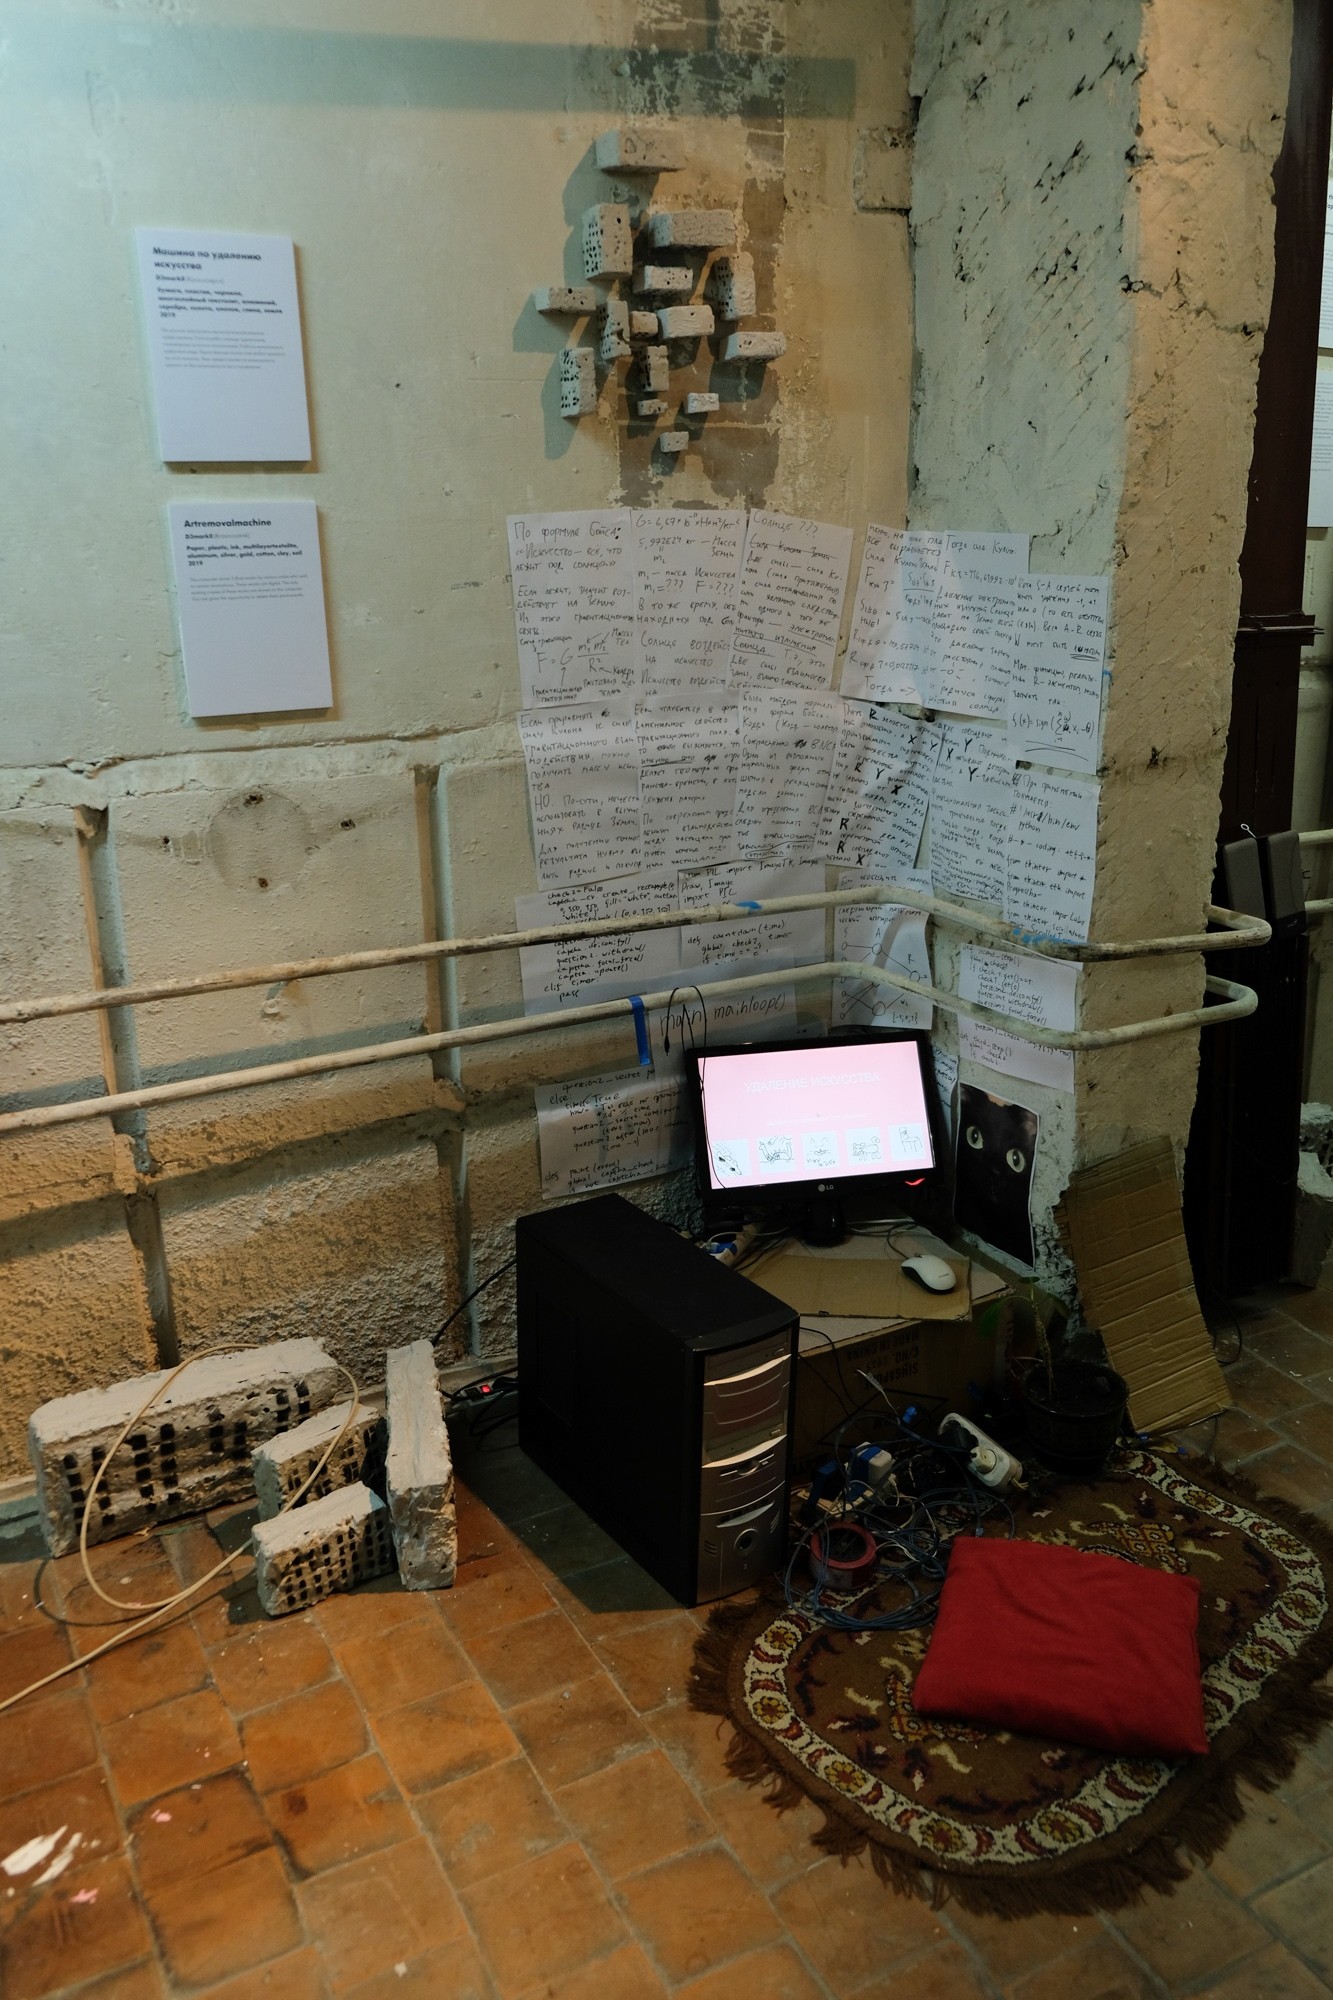 Machine for Deleting Art, 2019. On the computer, there are 5 unique copies of works by anonymous artists. Visitors can delete them without the possibility of restoring them